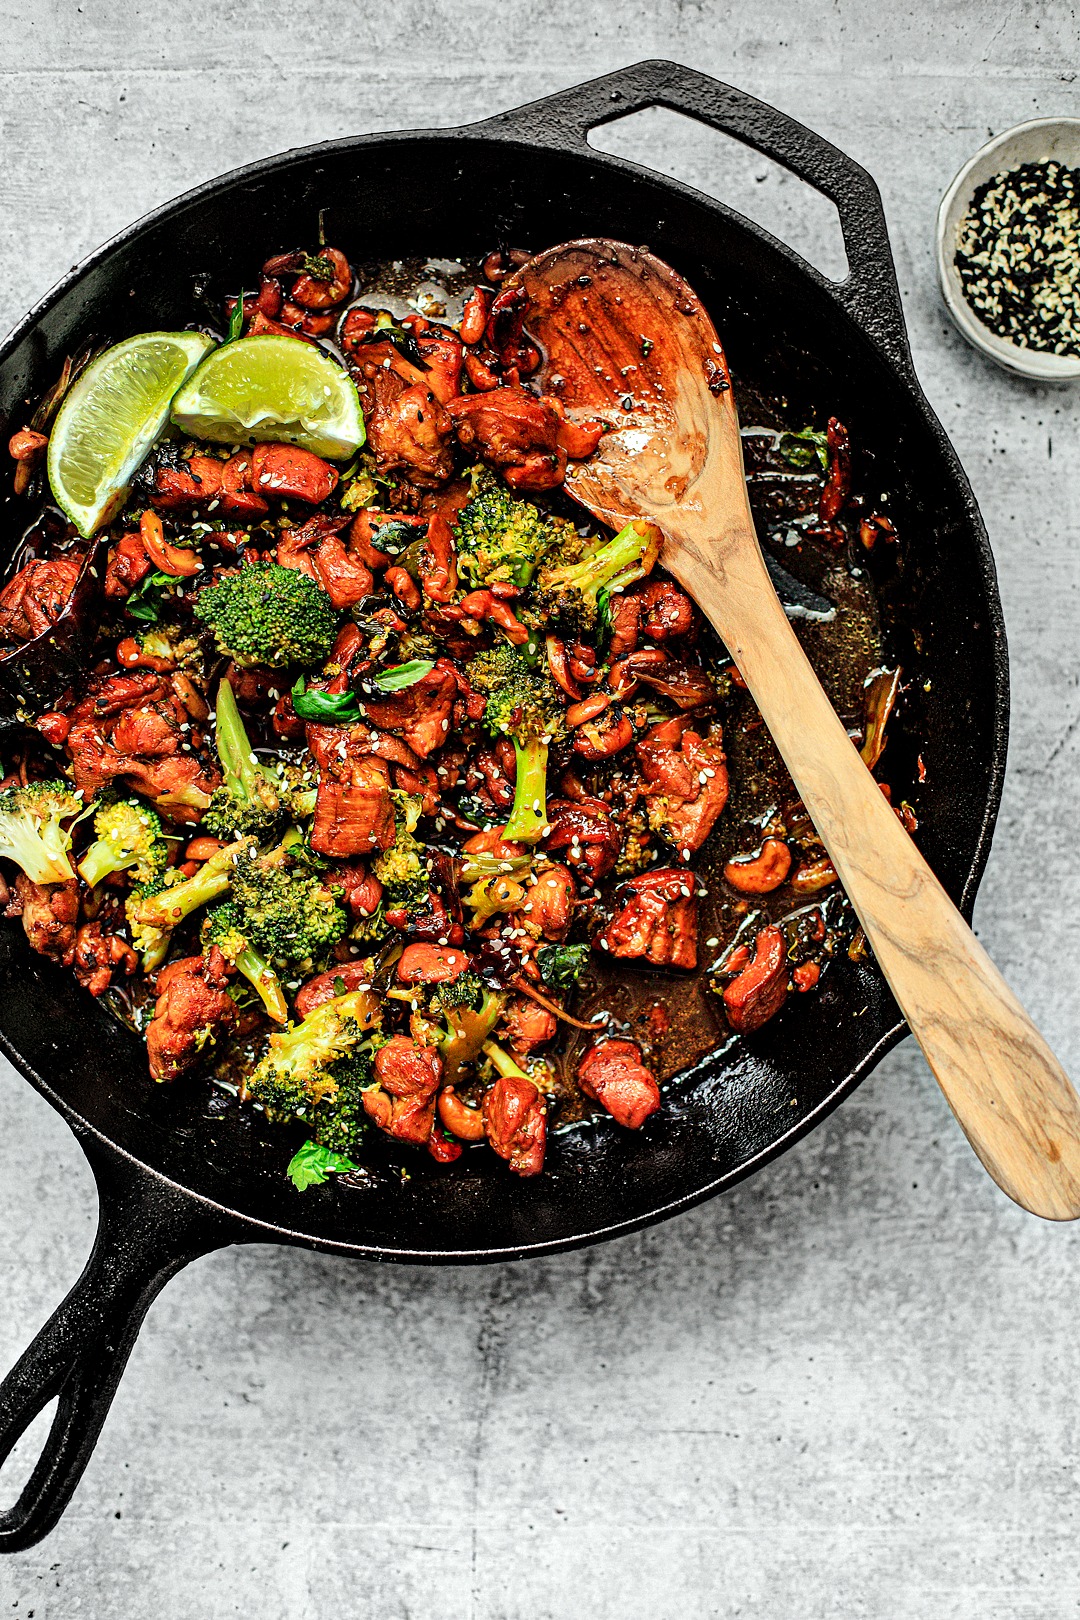 Skillet full of spicy sesame chicken and broccoli.